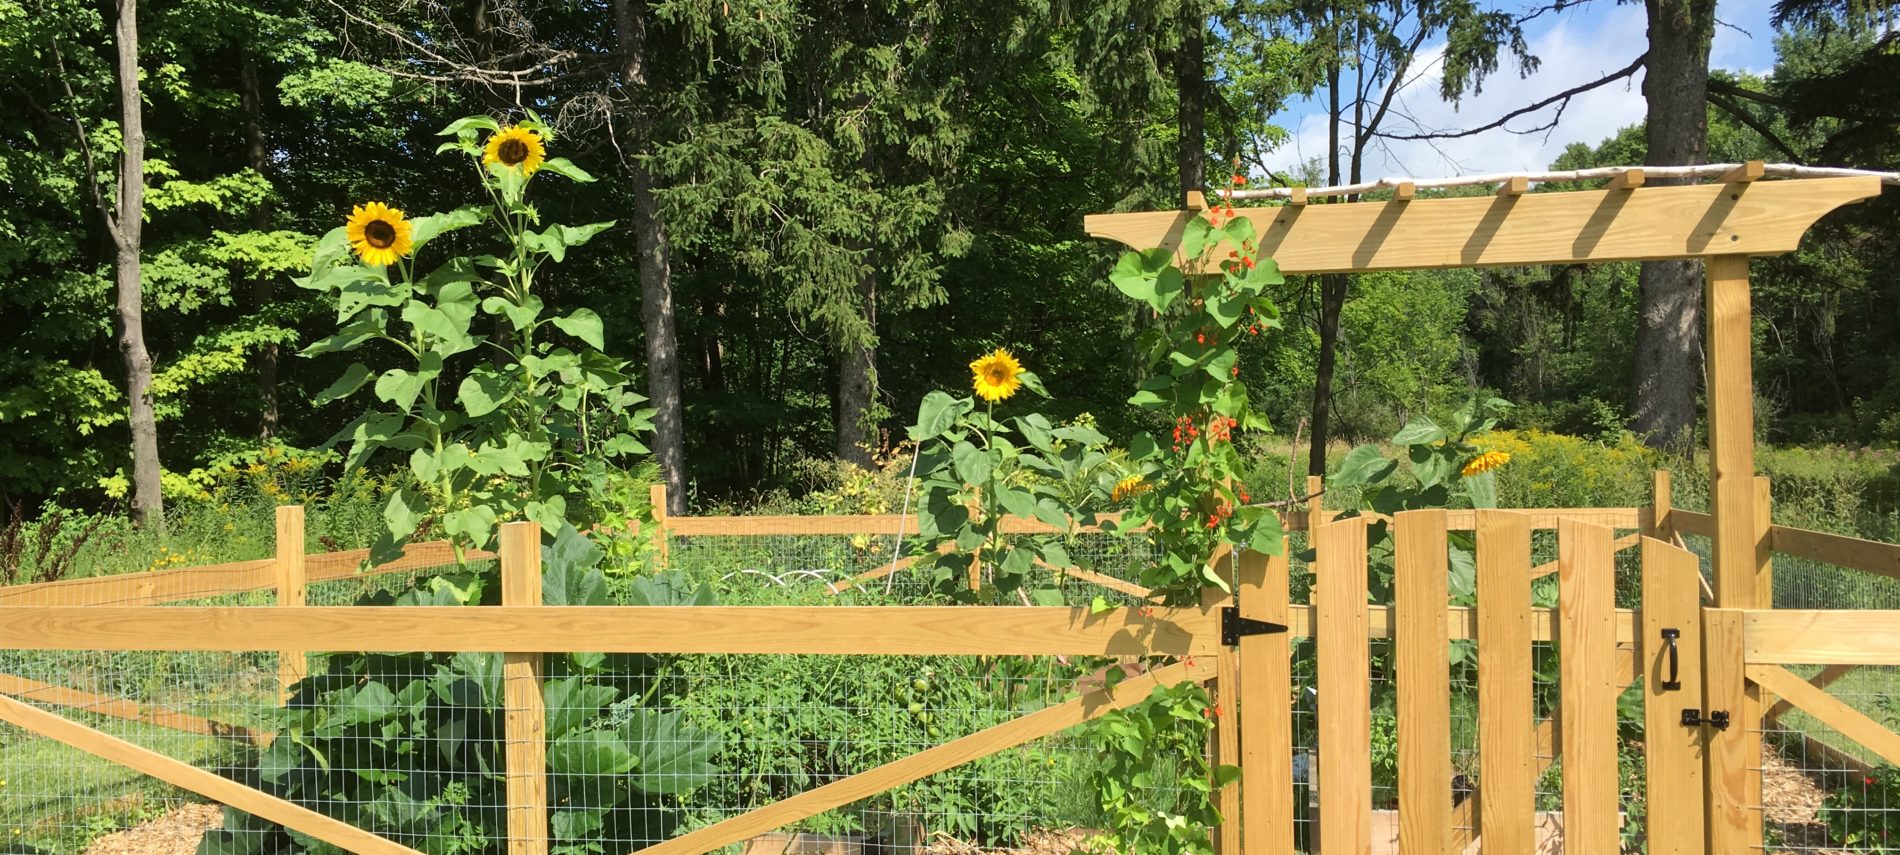 A pagoda style wood garden gate with sunflowers, and the woods beyond, on a sunny day.